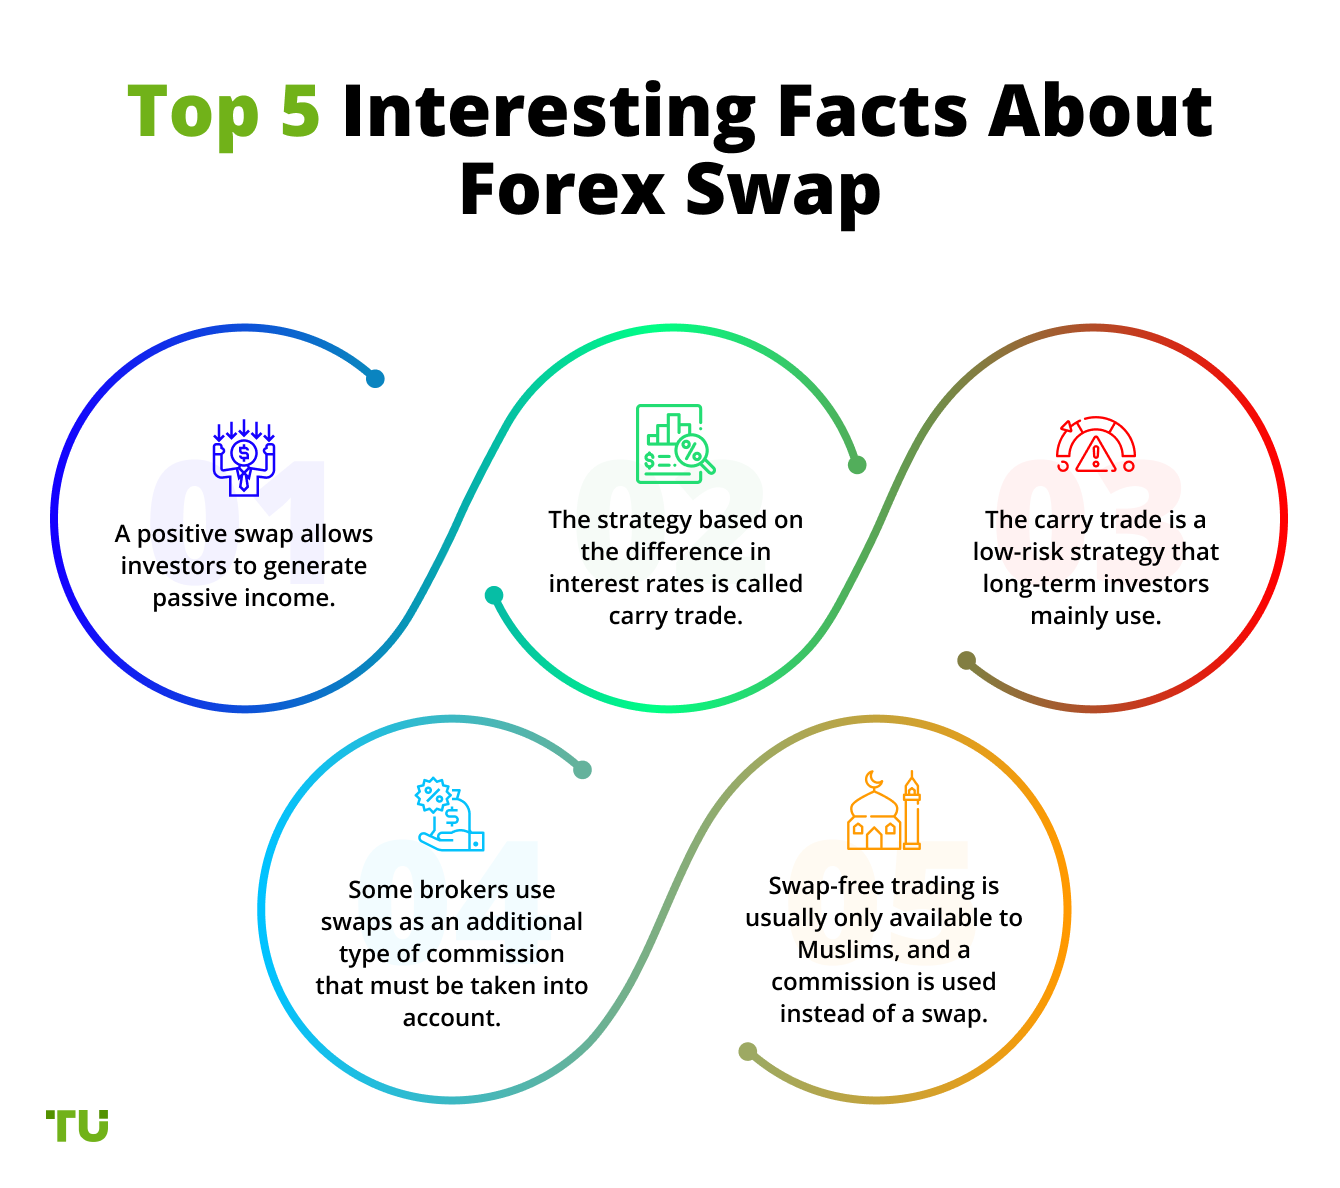 Top 5 Interesting Facts About Forex Swap